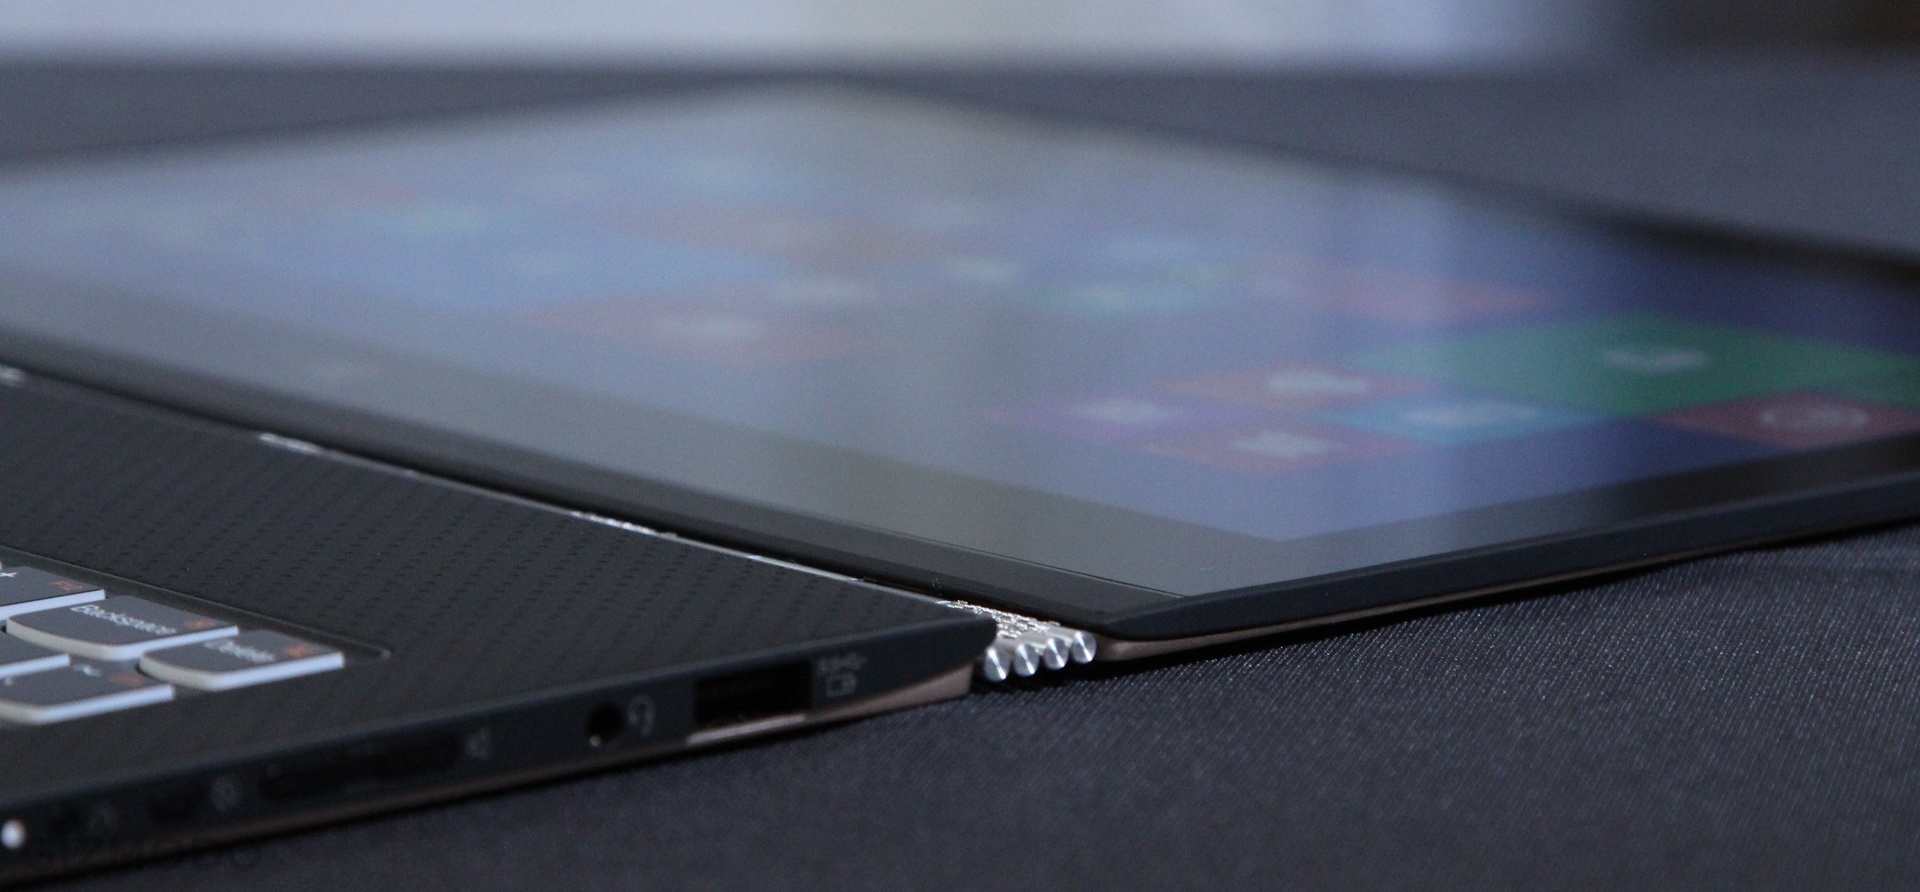 Lenovo Yoga 3 Pro Hands On: Yes, The Hinge Is A Giant Watch Band